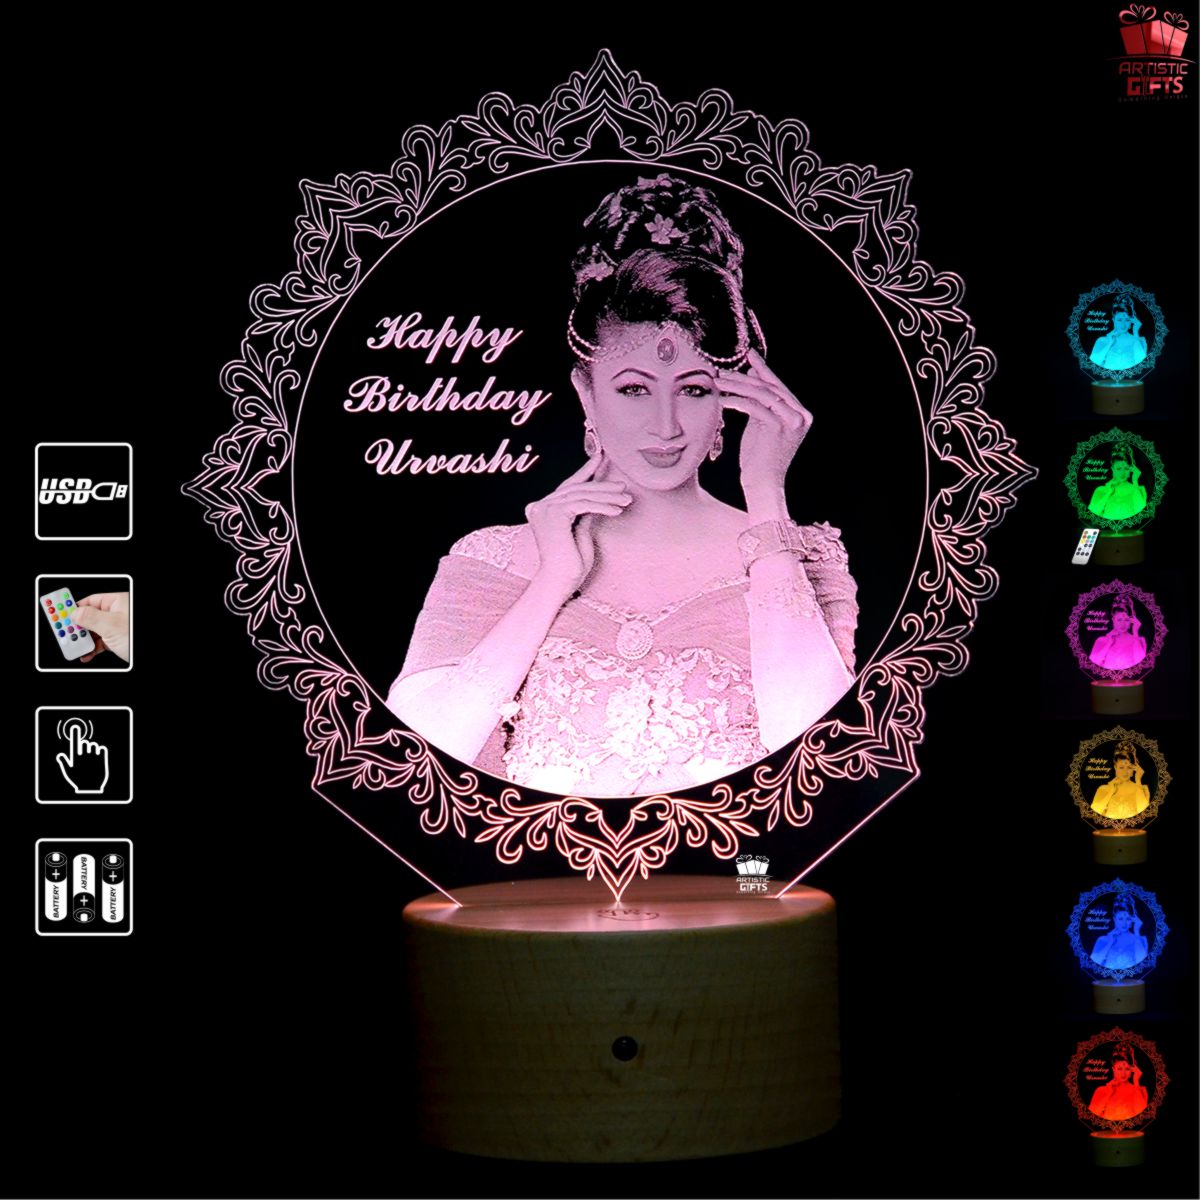 Personalized 3D Illusion LED Lamp for Birthday